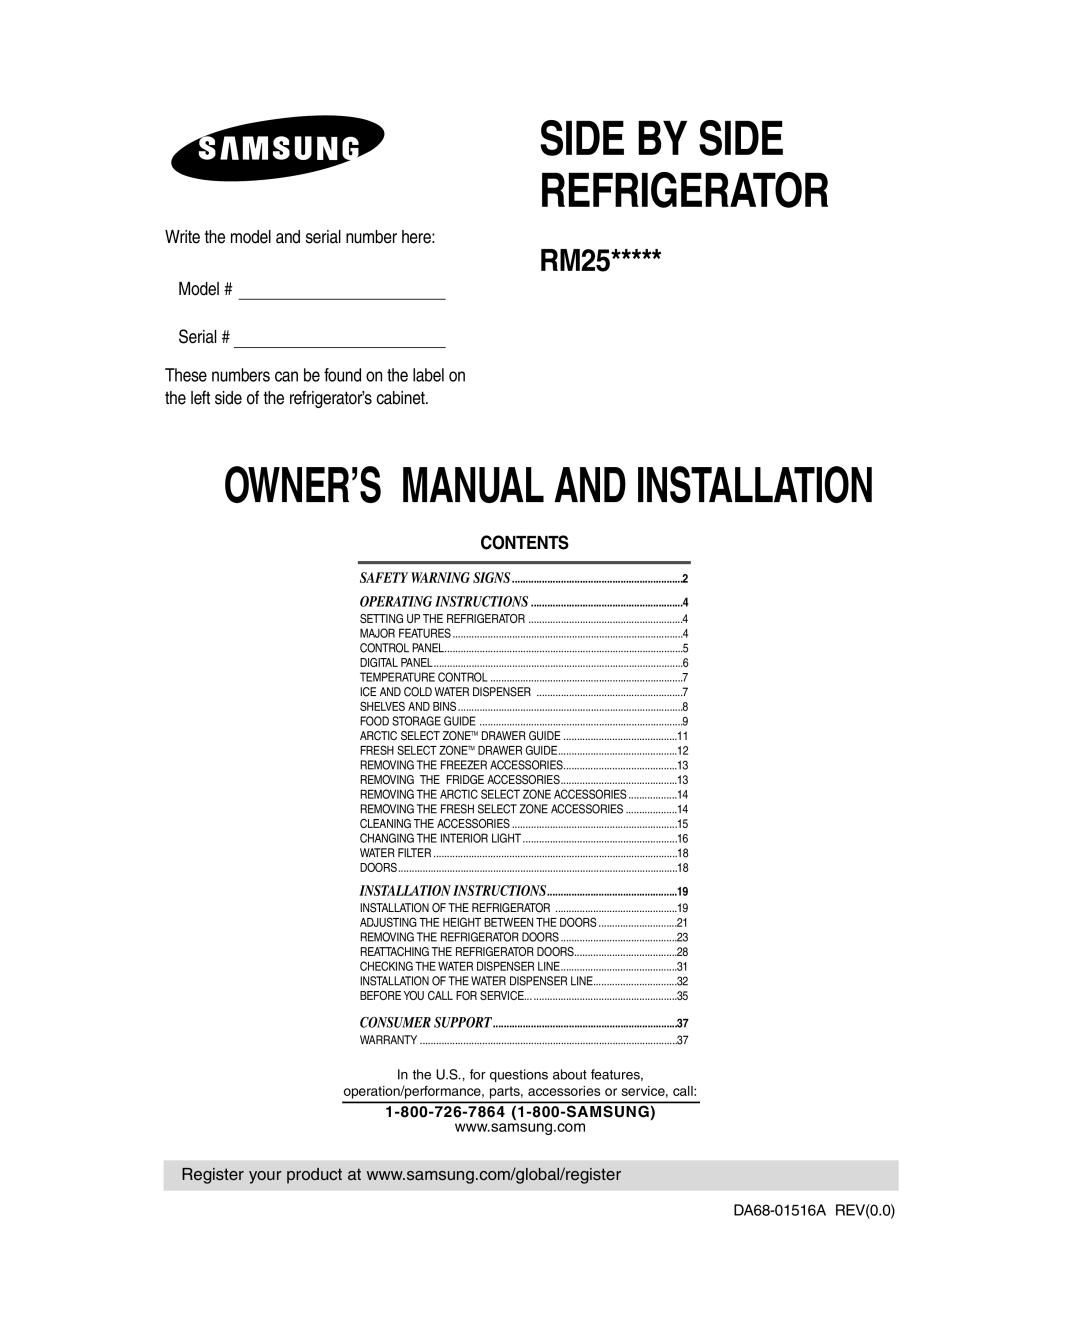 Samsung RM255LARS owner manual Write the model and serial number here, Model # Serial #, Contents, Safety Warning Signs 